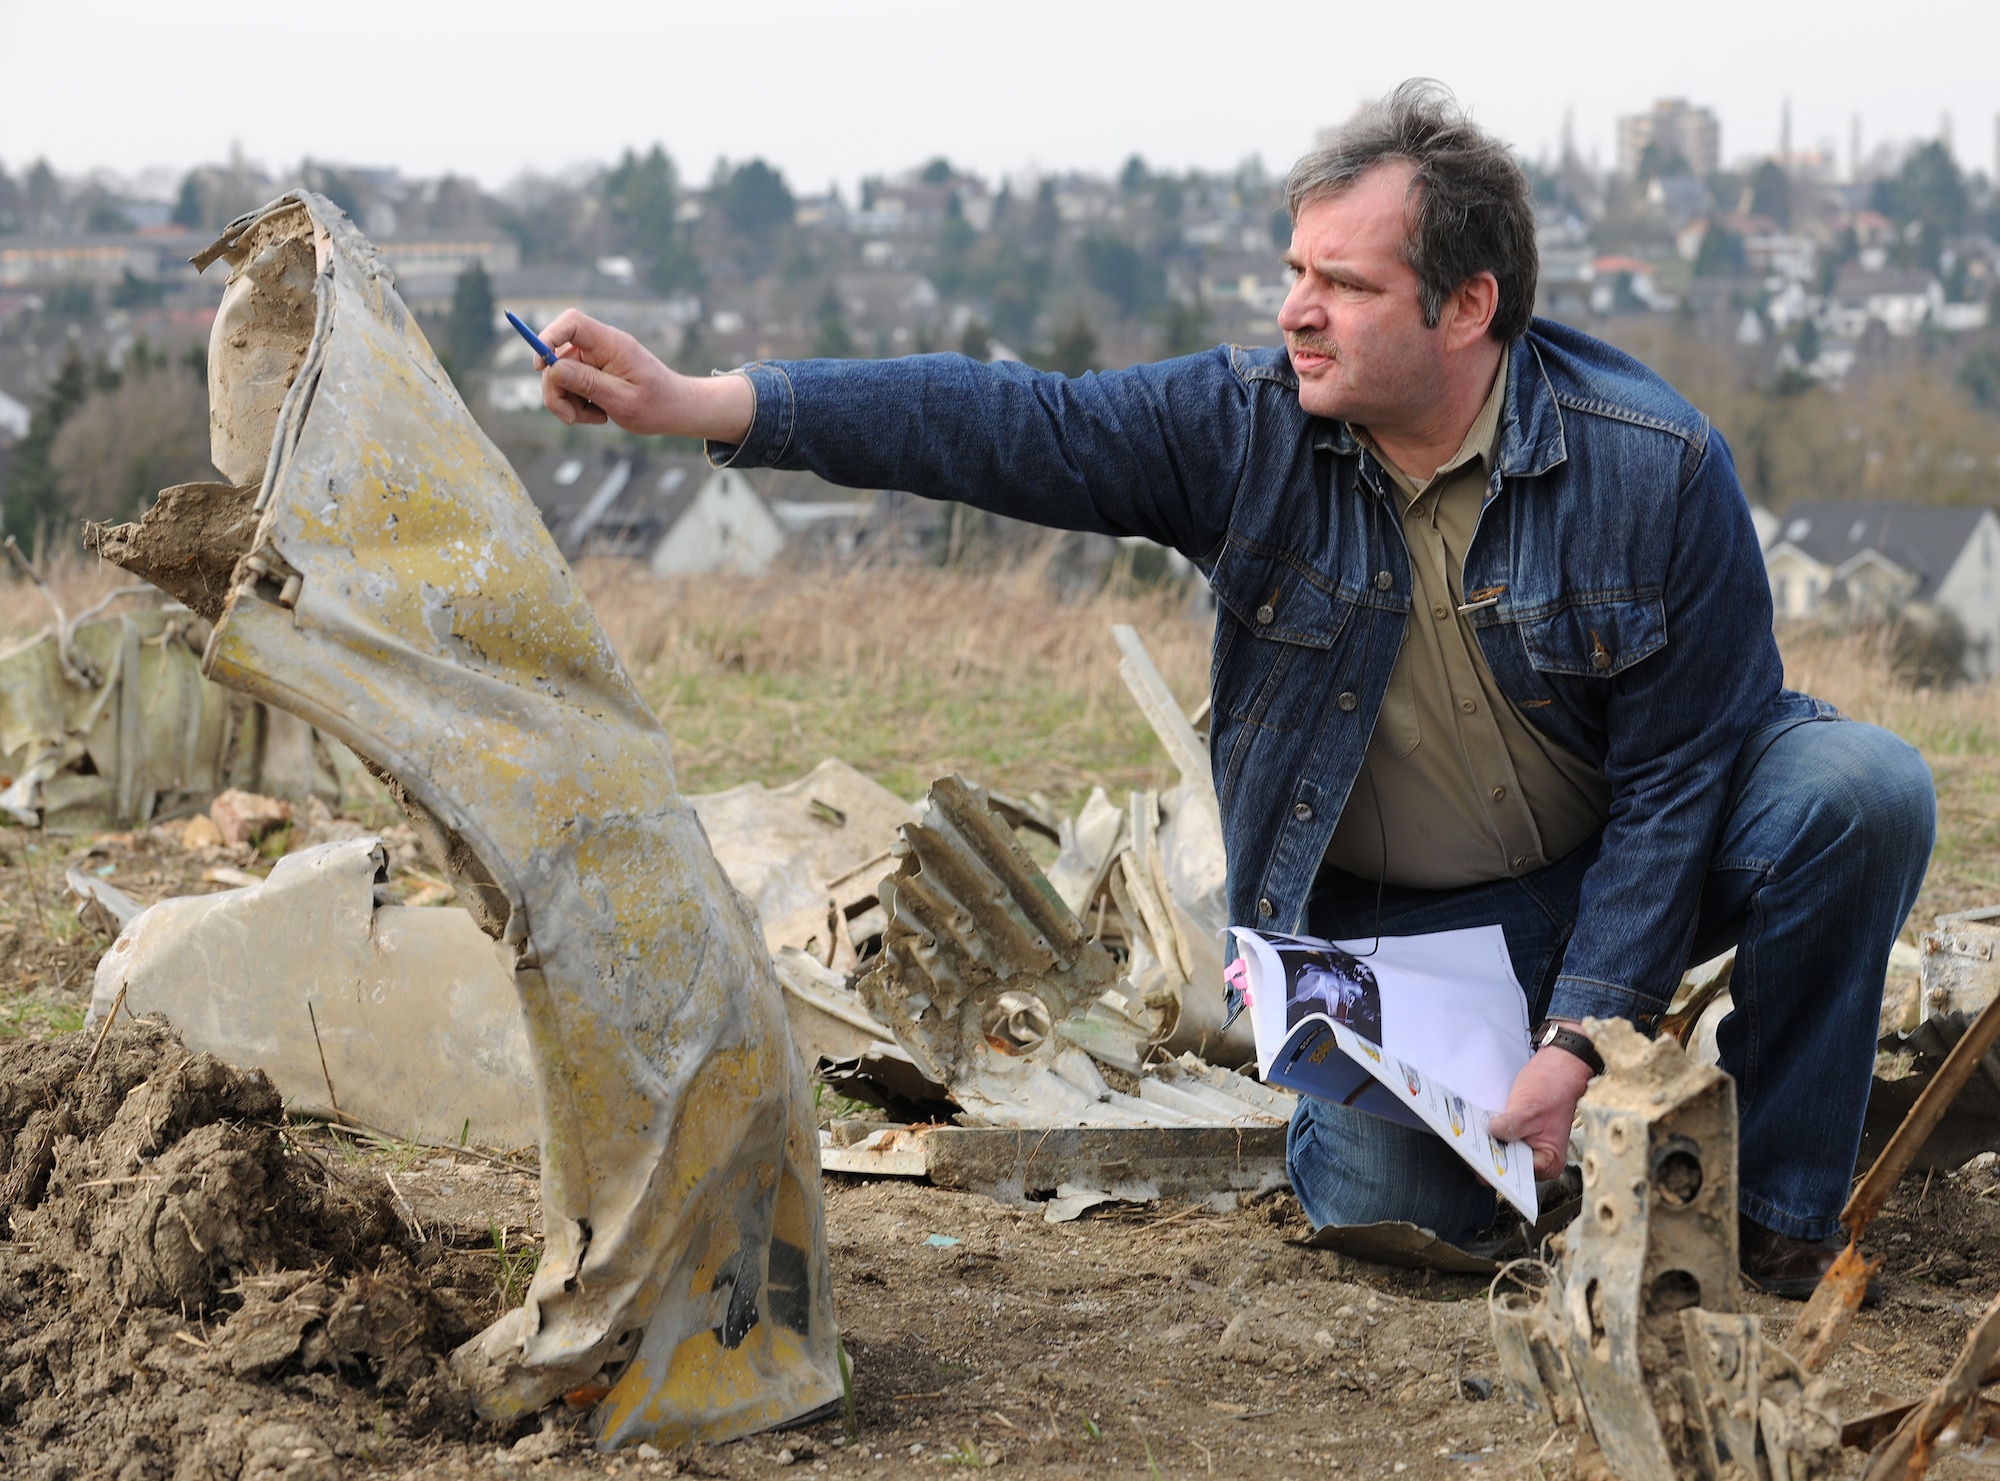 BITBURG, Germany – Horst Weber, member of the Bitburg Area Historical Club, explains the markings on the engine cowling of a P-47D Thunderbolt during a press event March 24. The wreckage was discovered Feb. 24 after being buried for 65 years. German and American reports detail that on Feb. 14, 1945, an American P-47D was shot down in the area. (U.S. Air Force photo/Senior Airman Nathanael Callon)